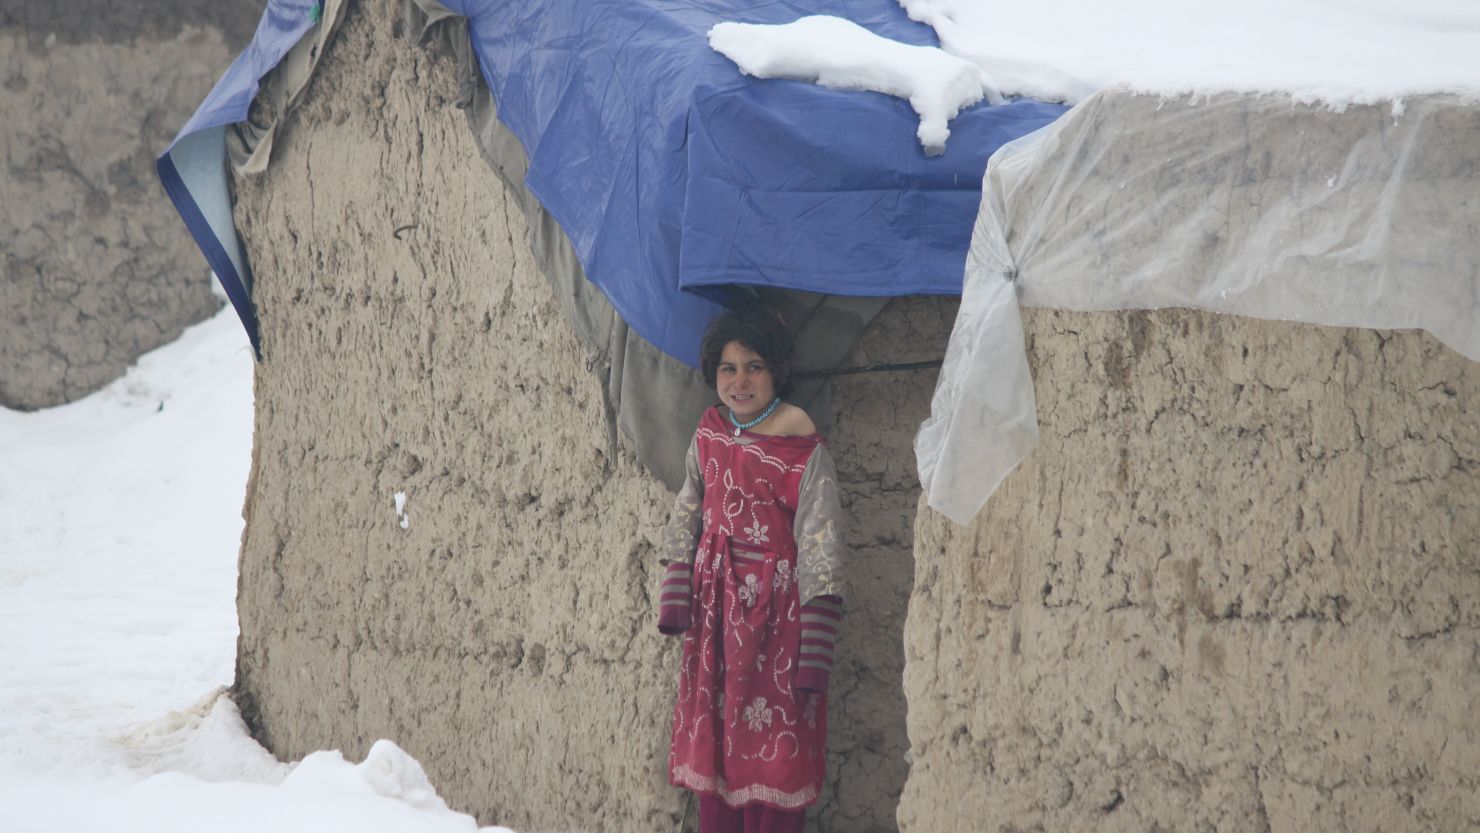 A child refugee shivers in the cold weather in a makeshift home in the eastern part of Kabul, Afghanistan.